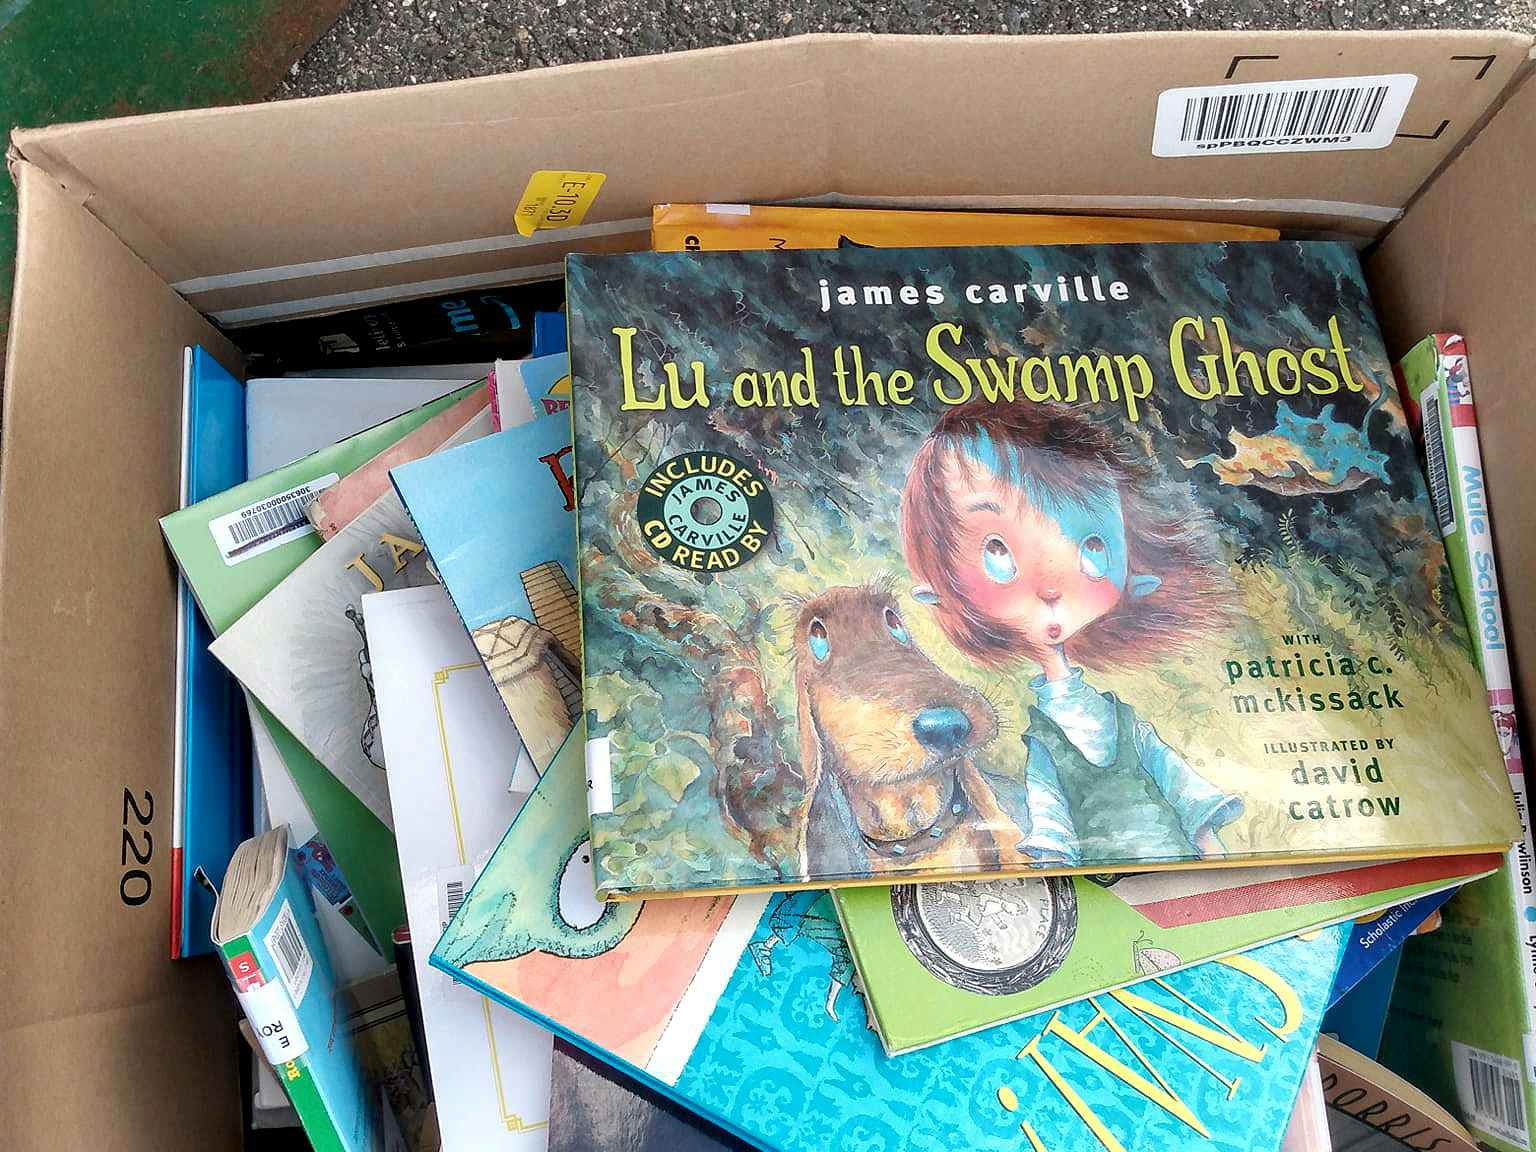 box of childrens books found while dumpster diving